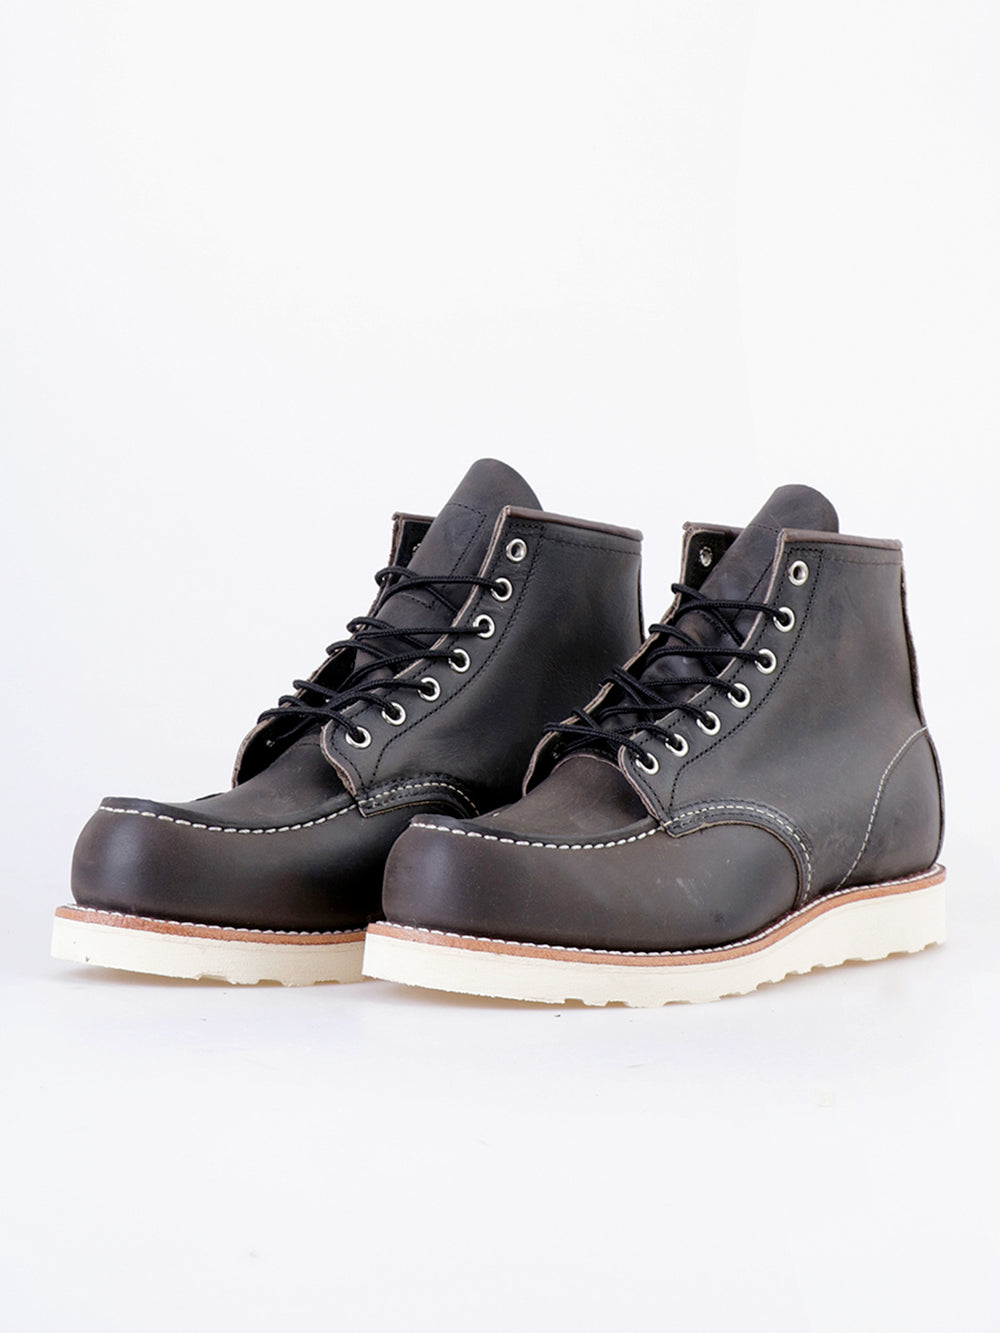 RED WING SHOES 8890 6' Classic Moc Toe Charcoal Rough & Tough Grigio Urbanstaroma